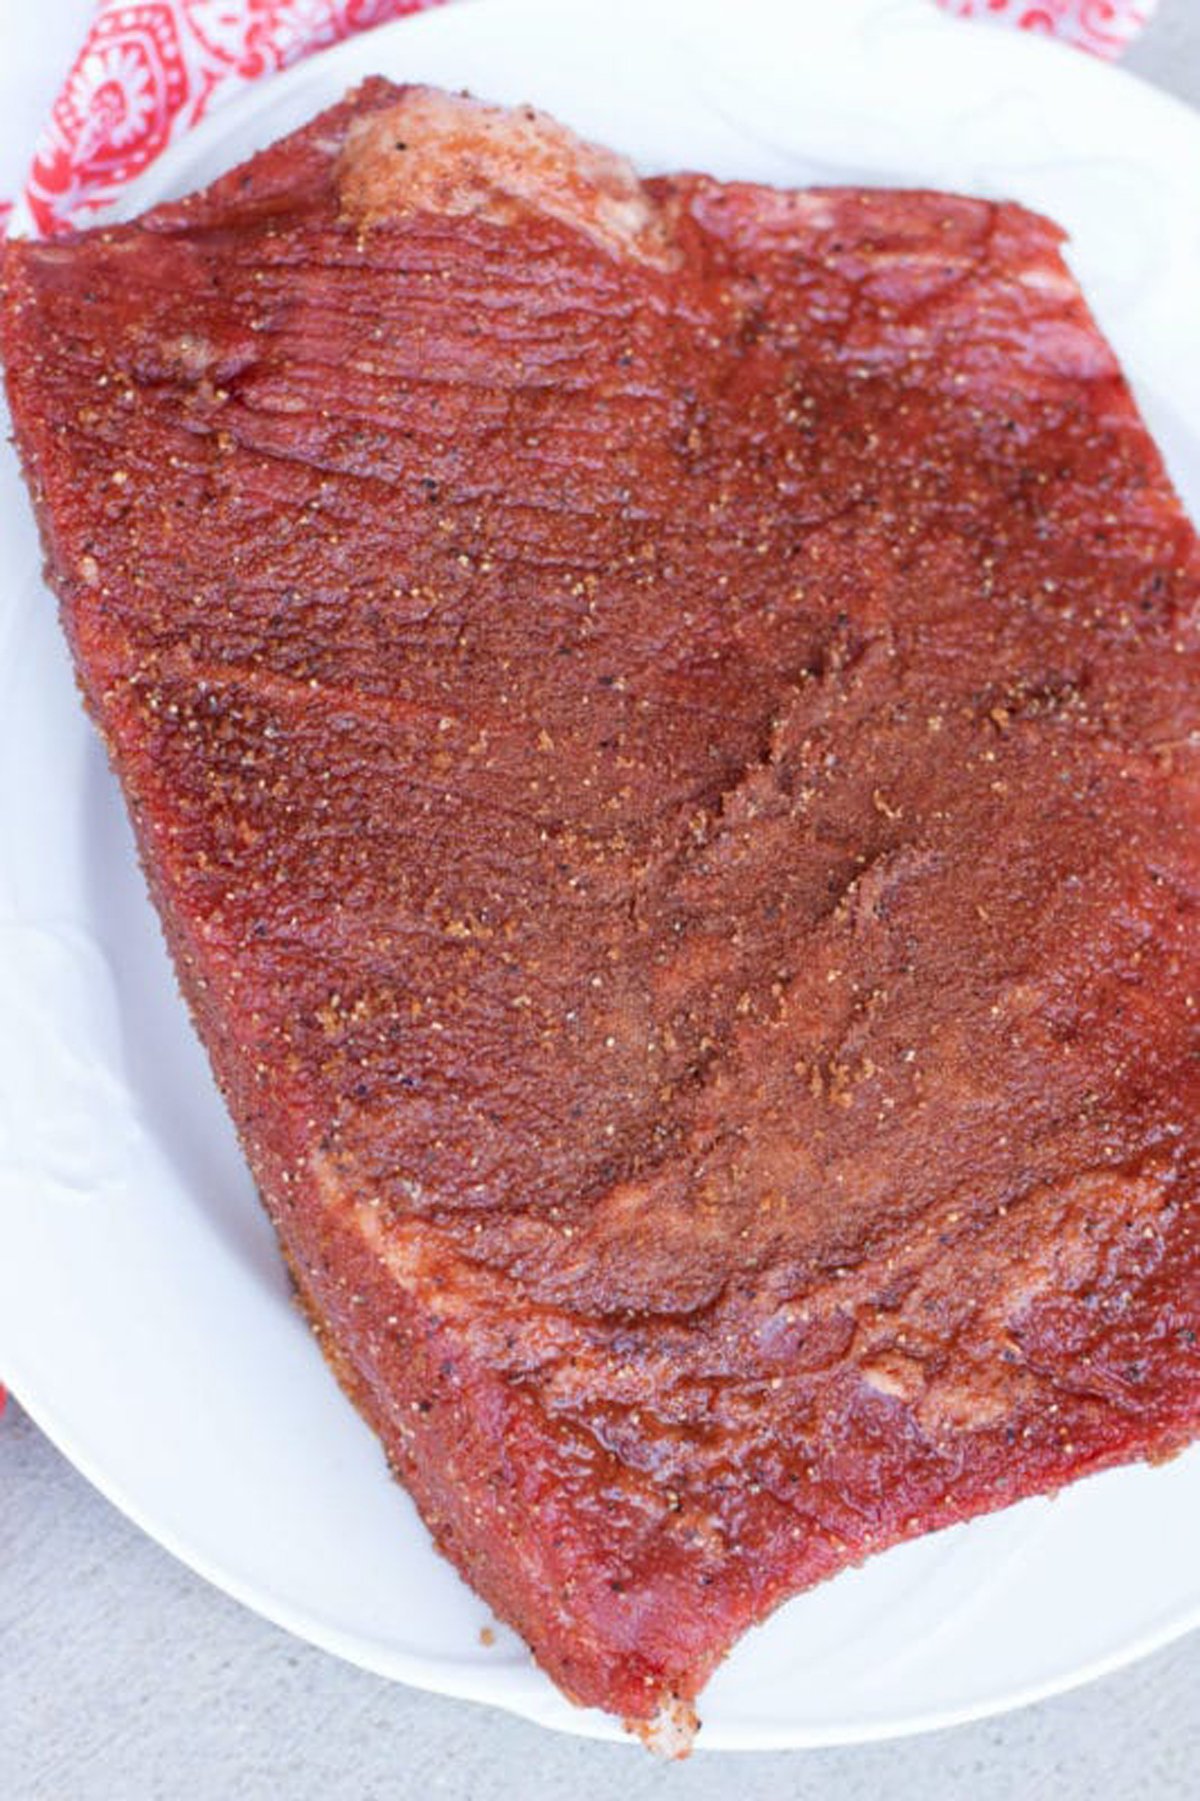 3 lbs of raw beef brisket covered in dry rub seasoing.